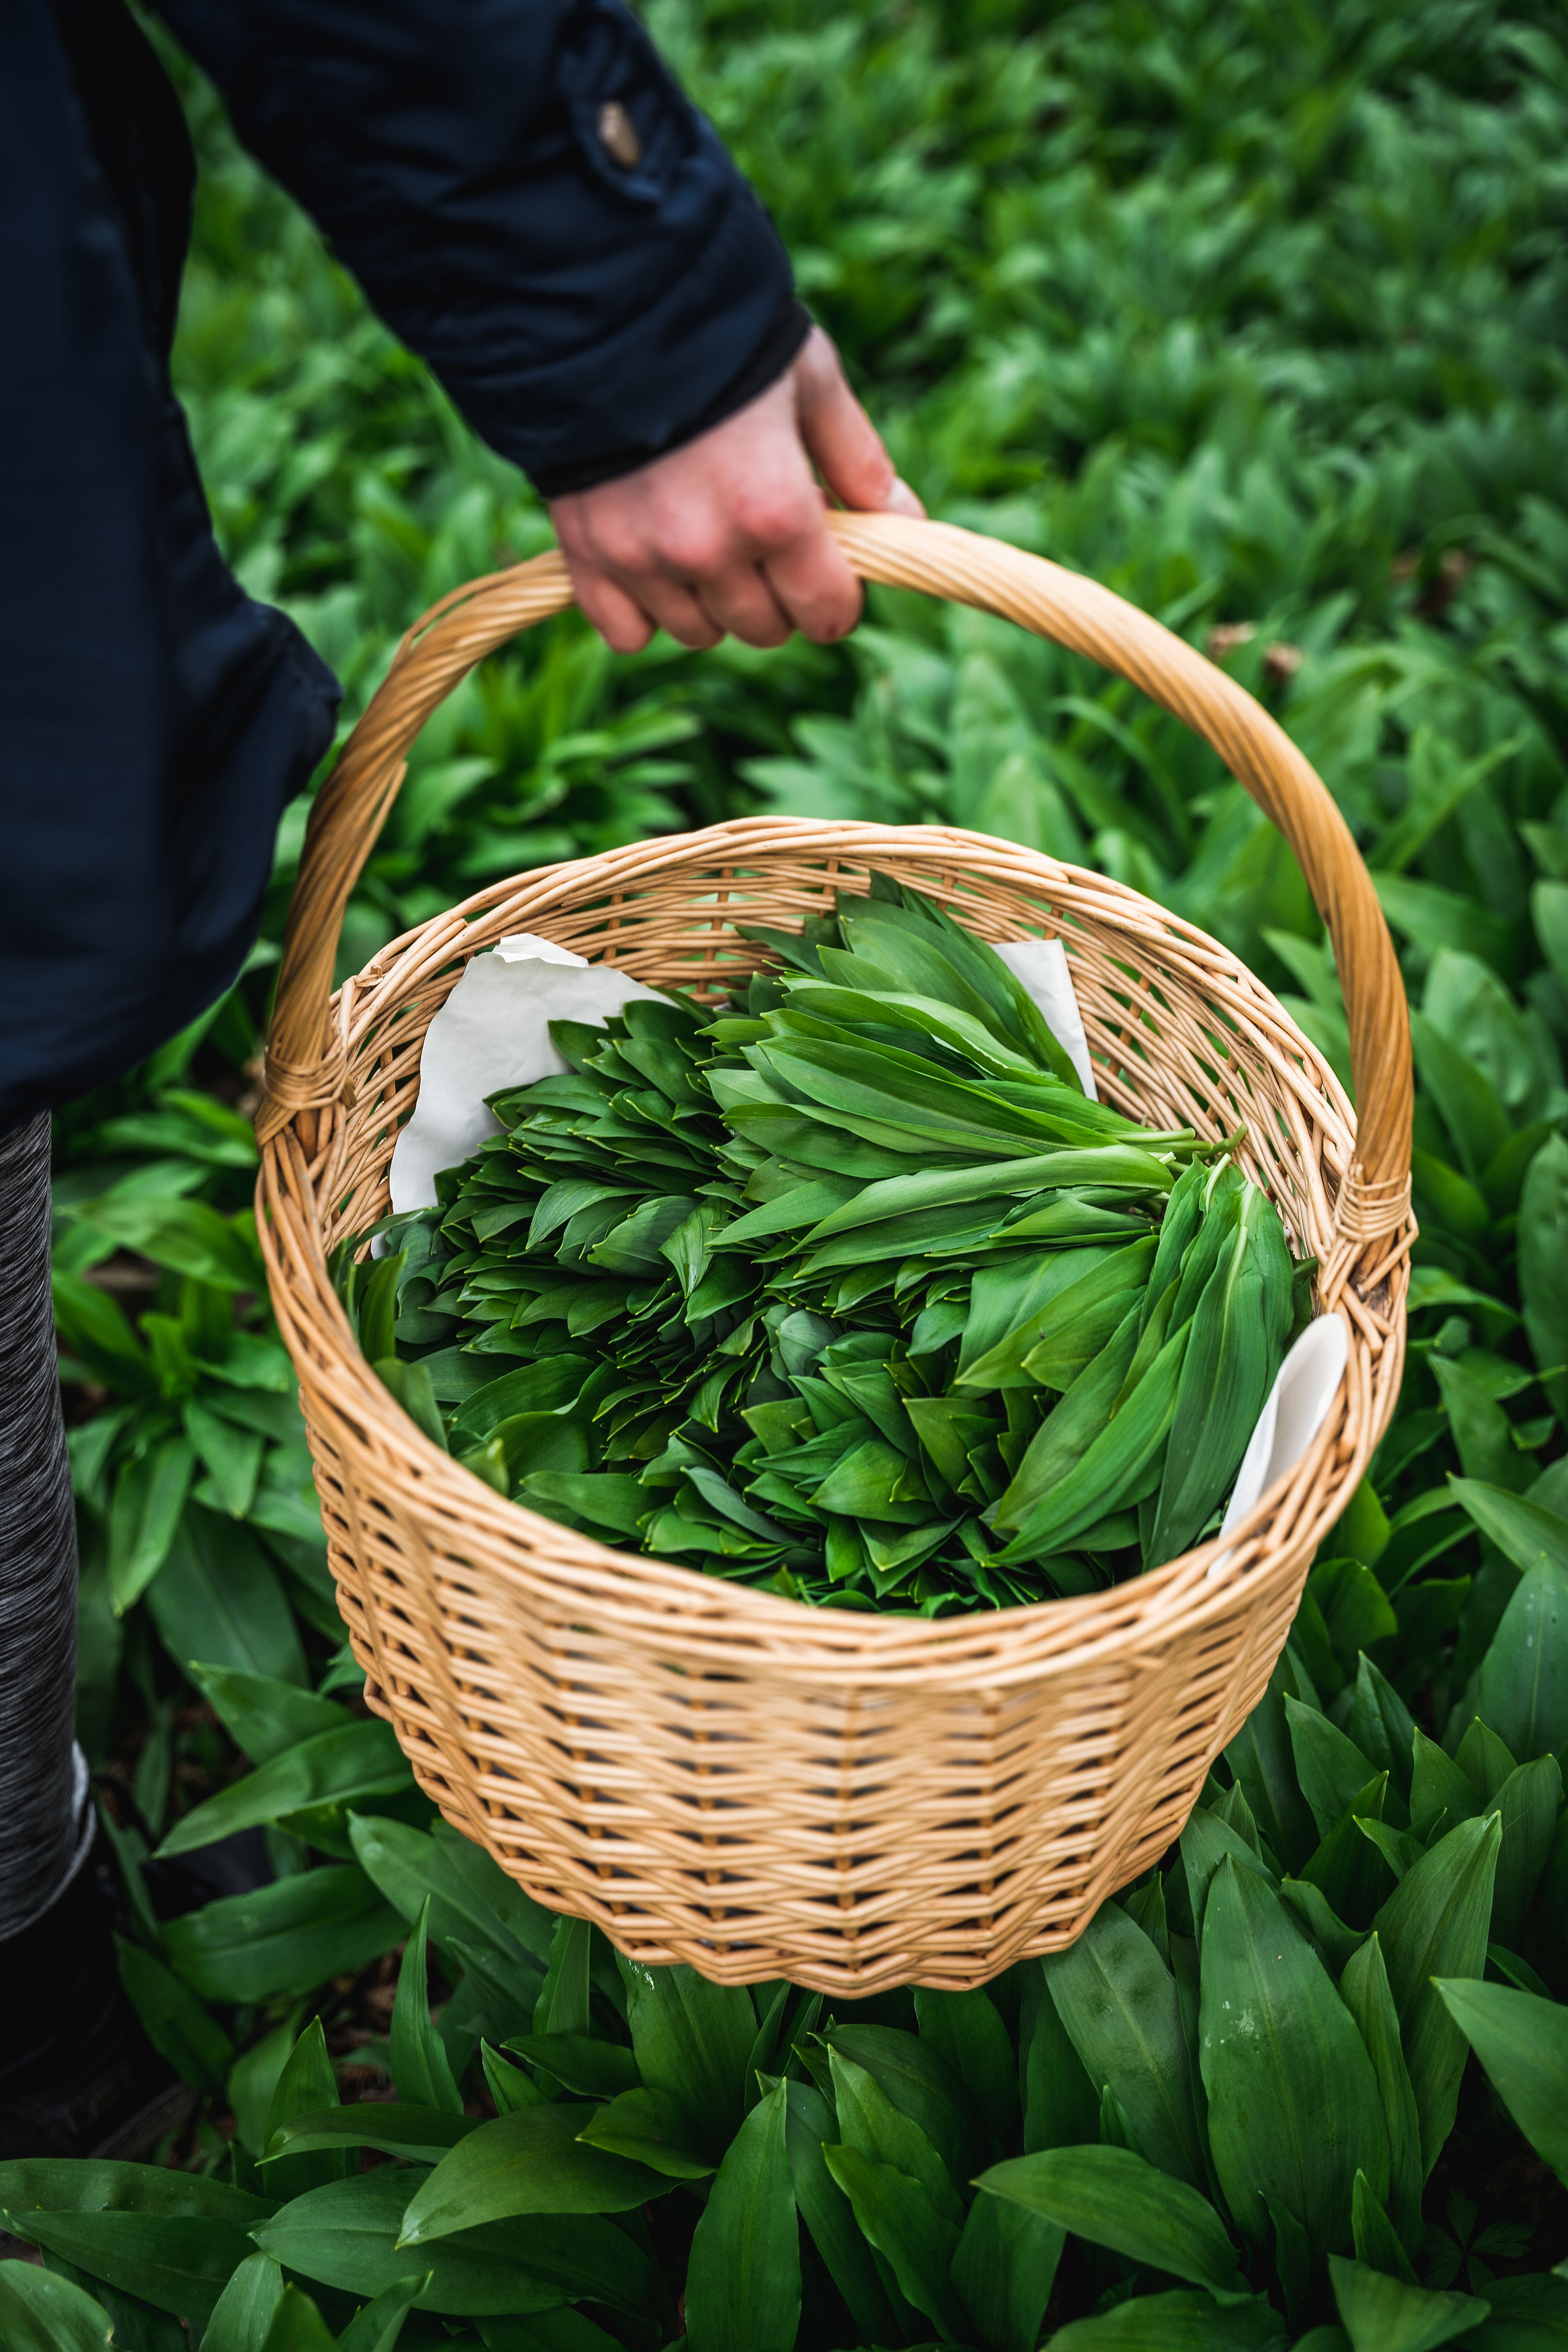 Wild garlic being collected in a basket from the forest